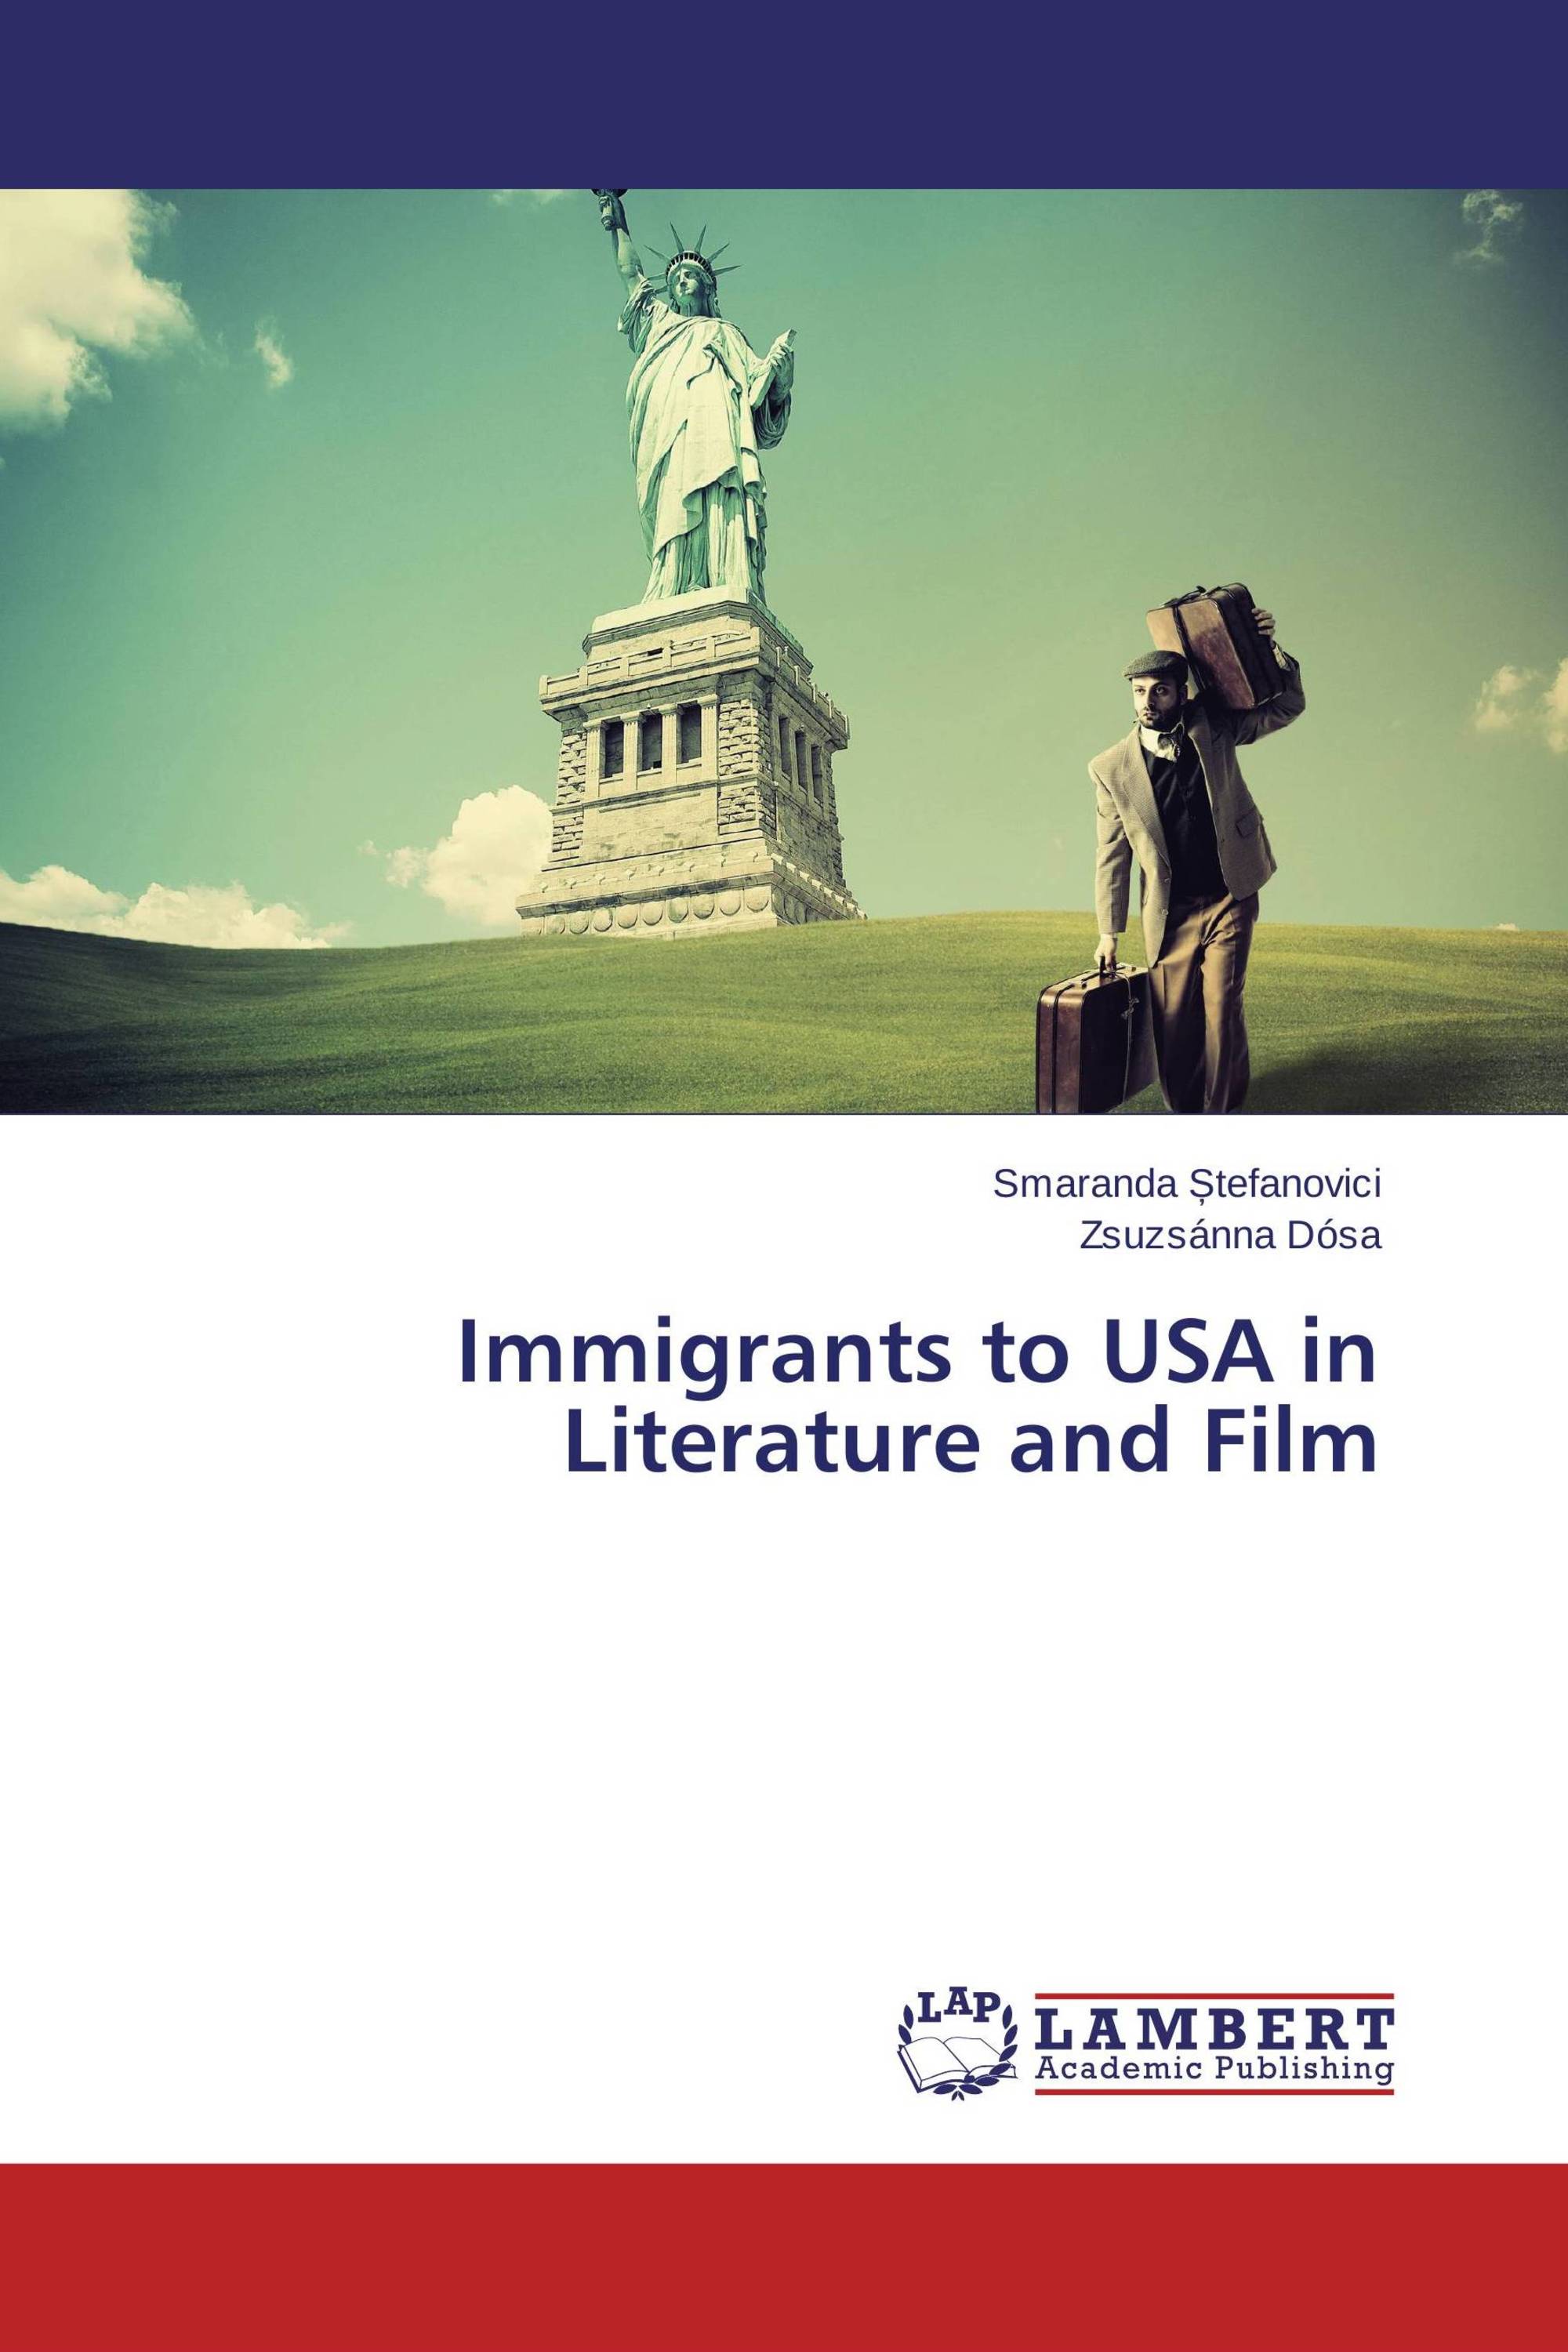 essays about immigrants coming to america